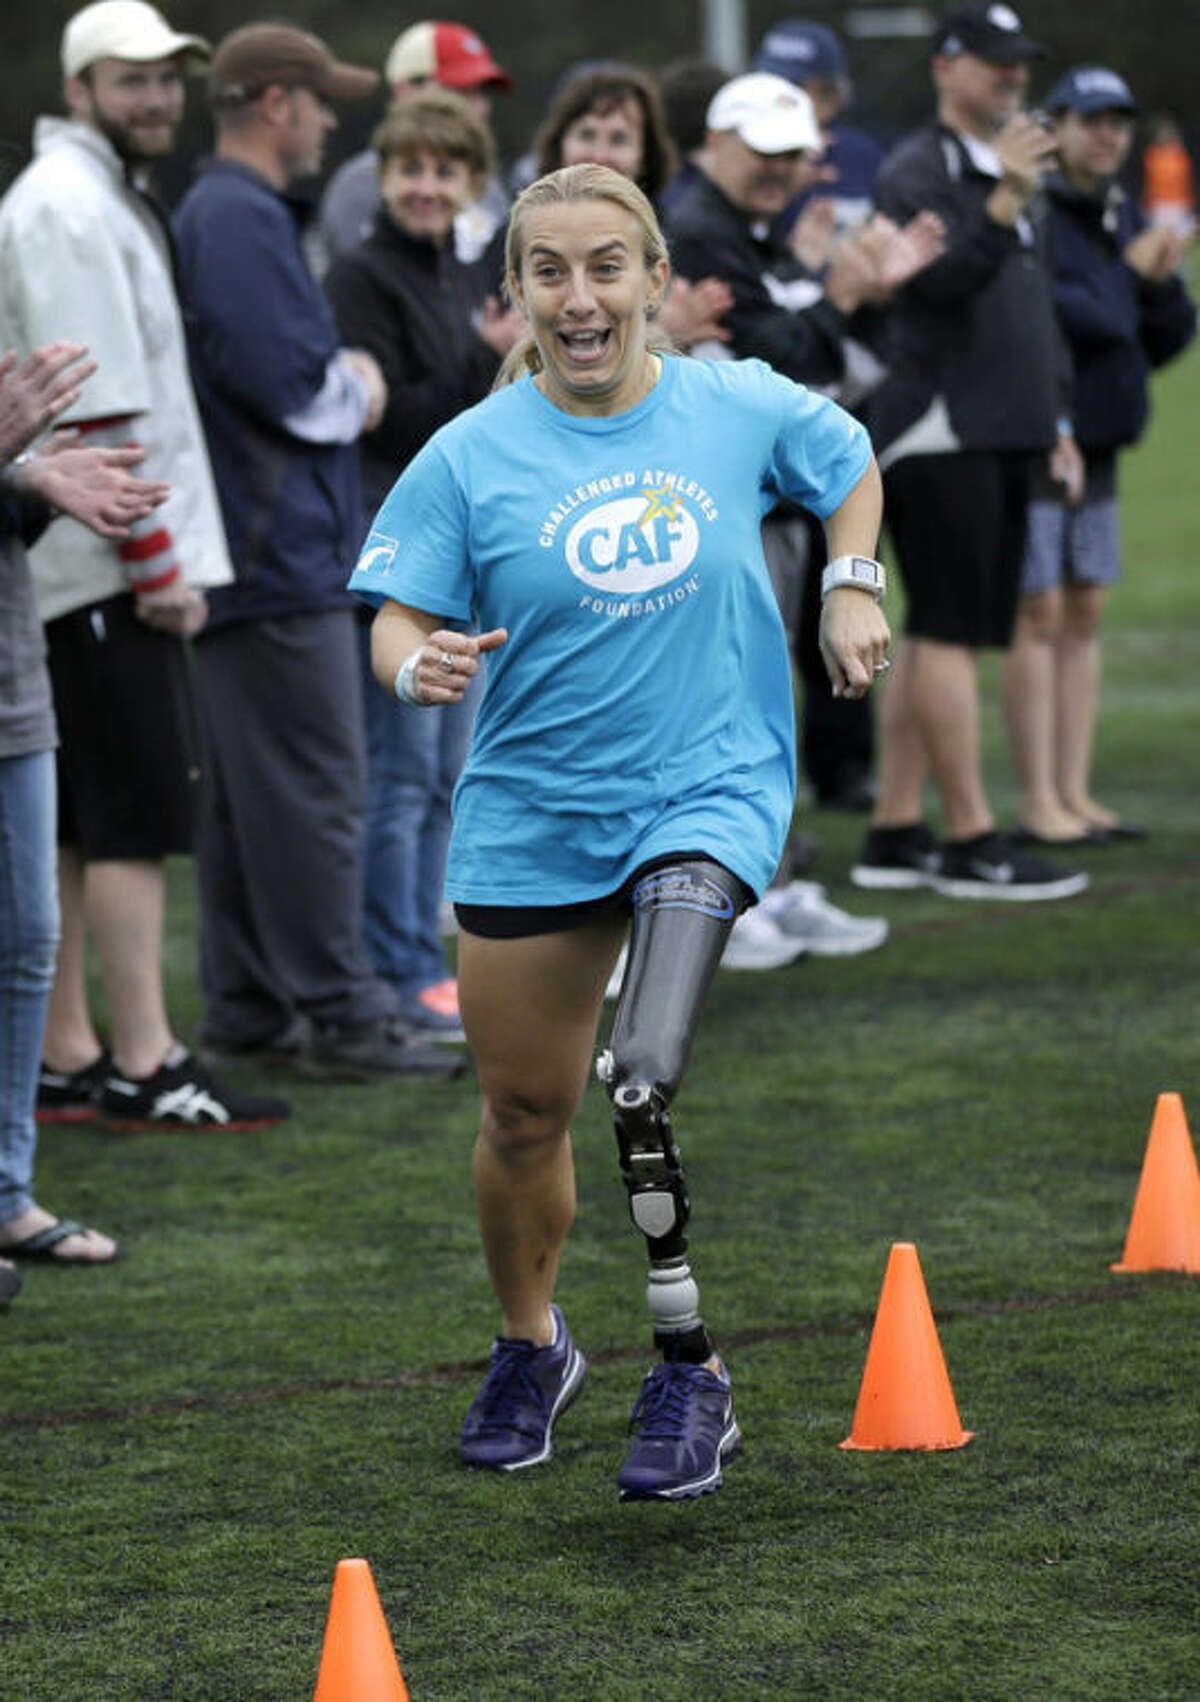 Triathlete Sarah Reinertsen, of San Juan Capistrano, Calif., smiles as she completes an obstacle course during a running clinic for challenged athletes Sunday, Oct. 6, 2013, in Cambridge, Mass. The clinic was run by the Challenged Athletes Foundation, which provides equipment and training for amputees to participate in sports. (AP Photo/Steven Senne)